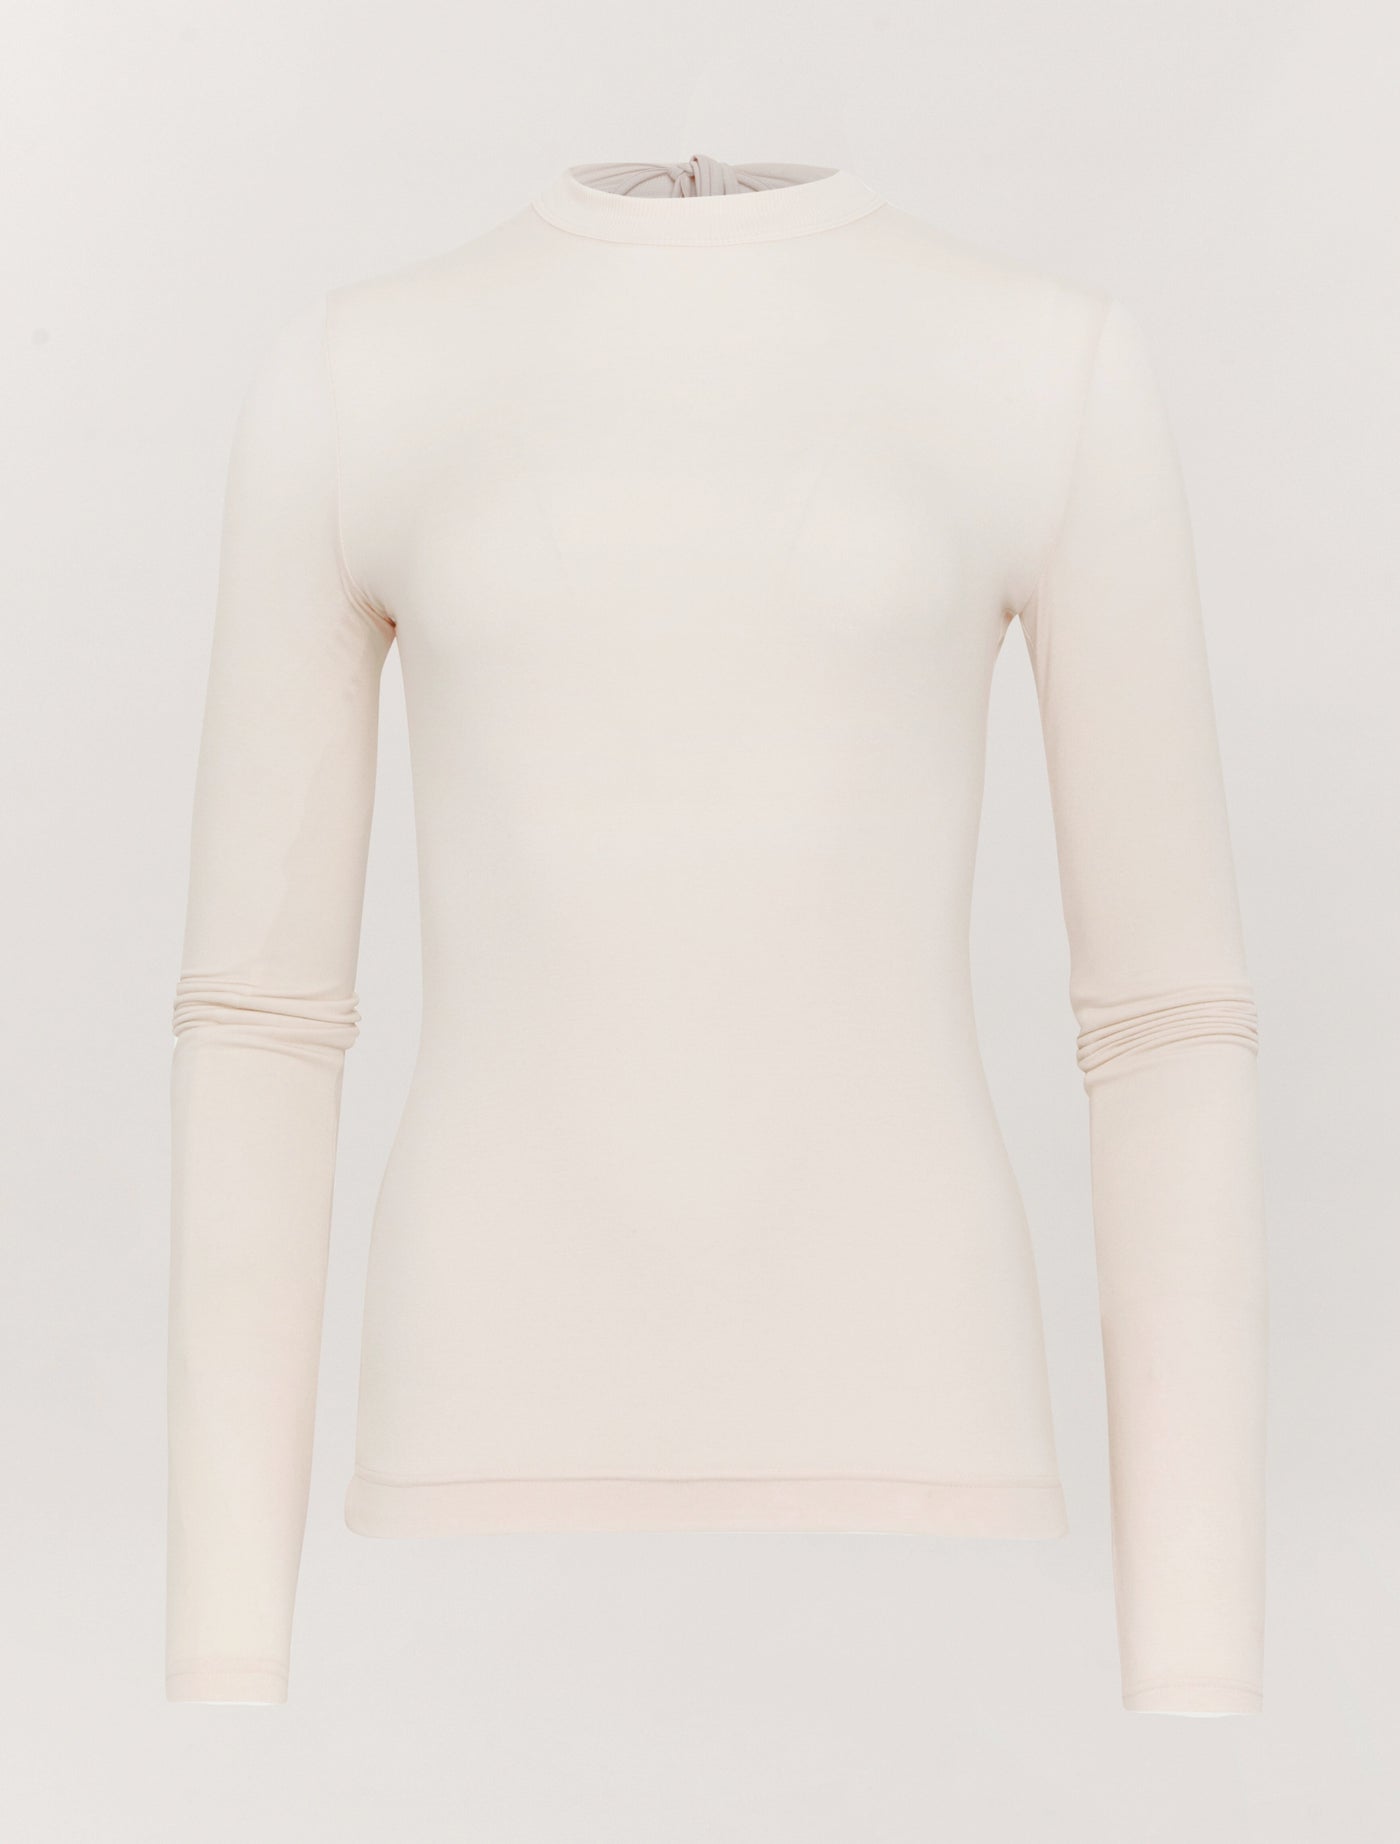 Byzan Micromodal Top in Pink